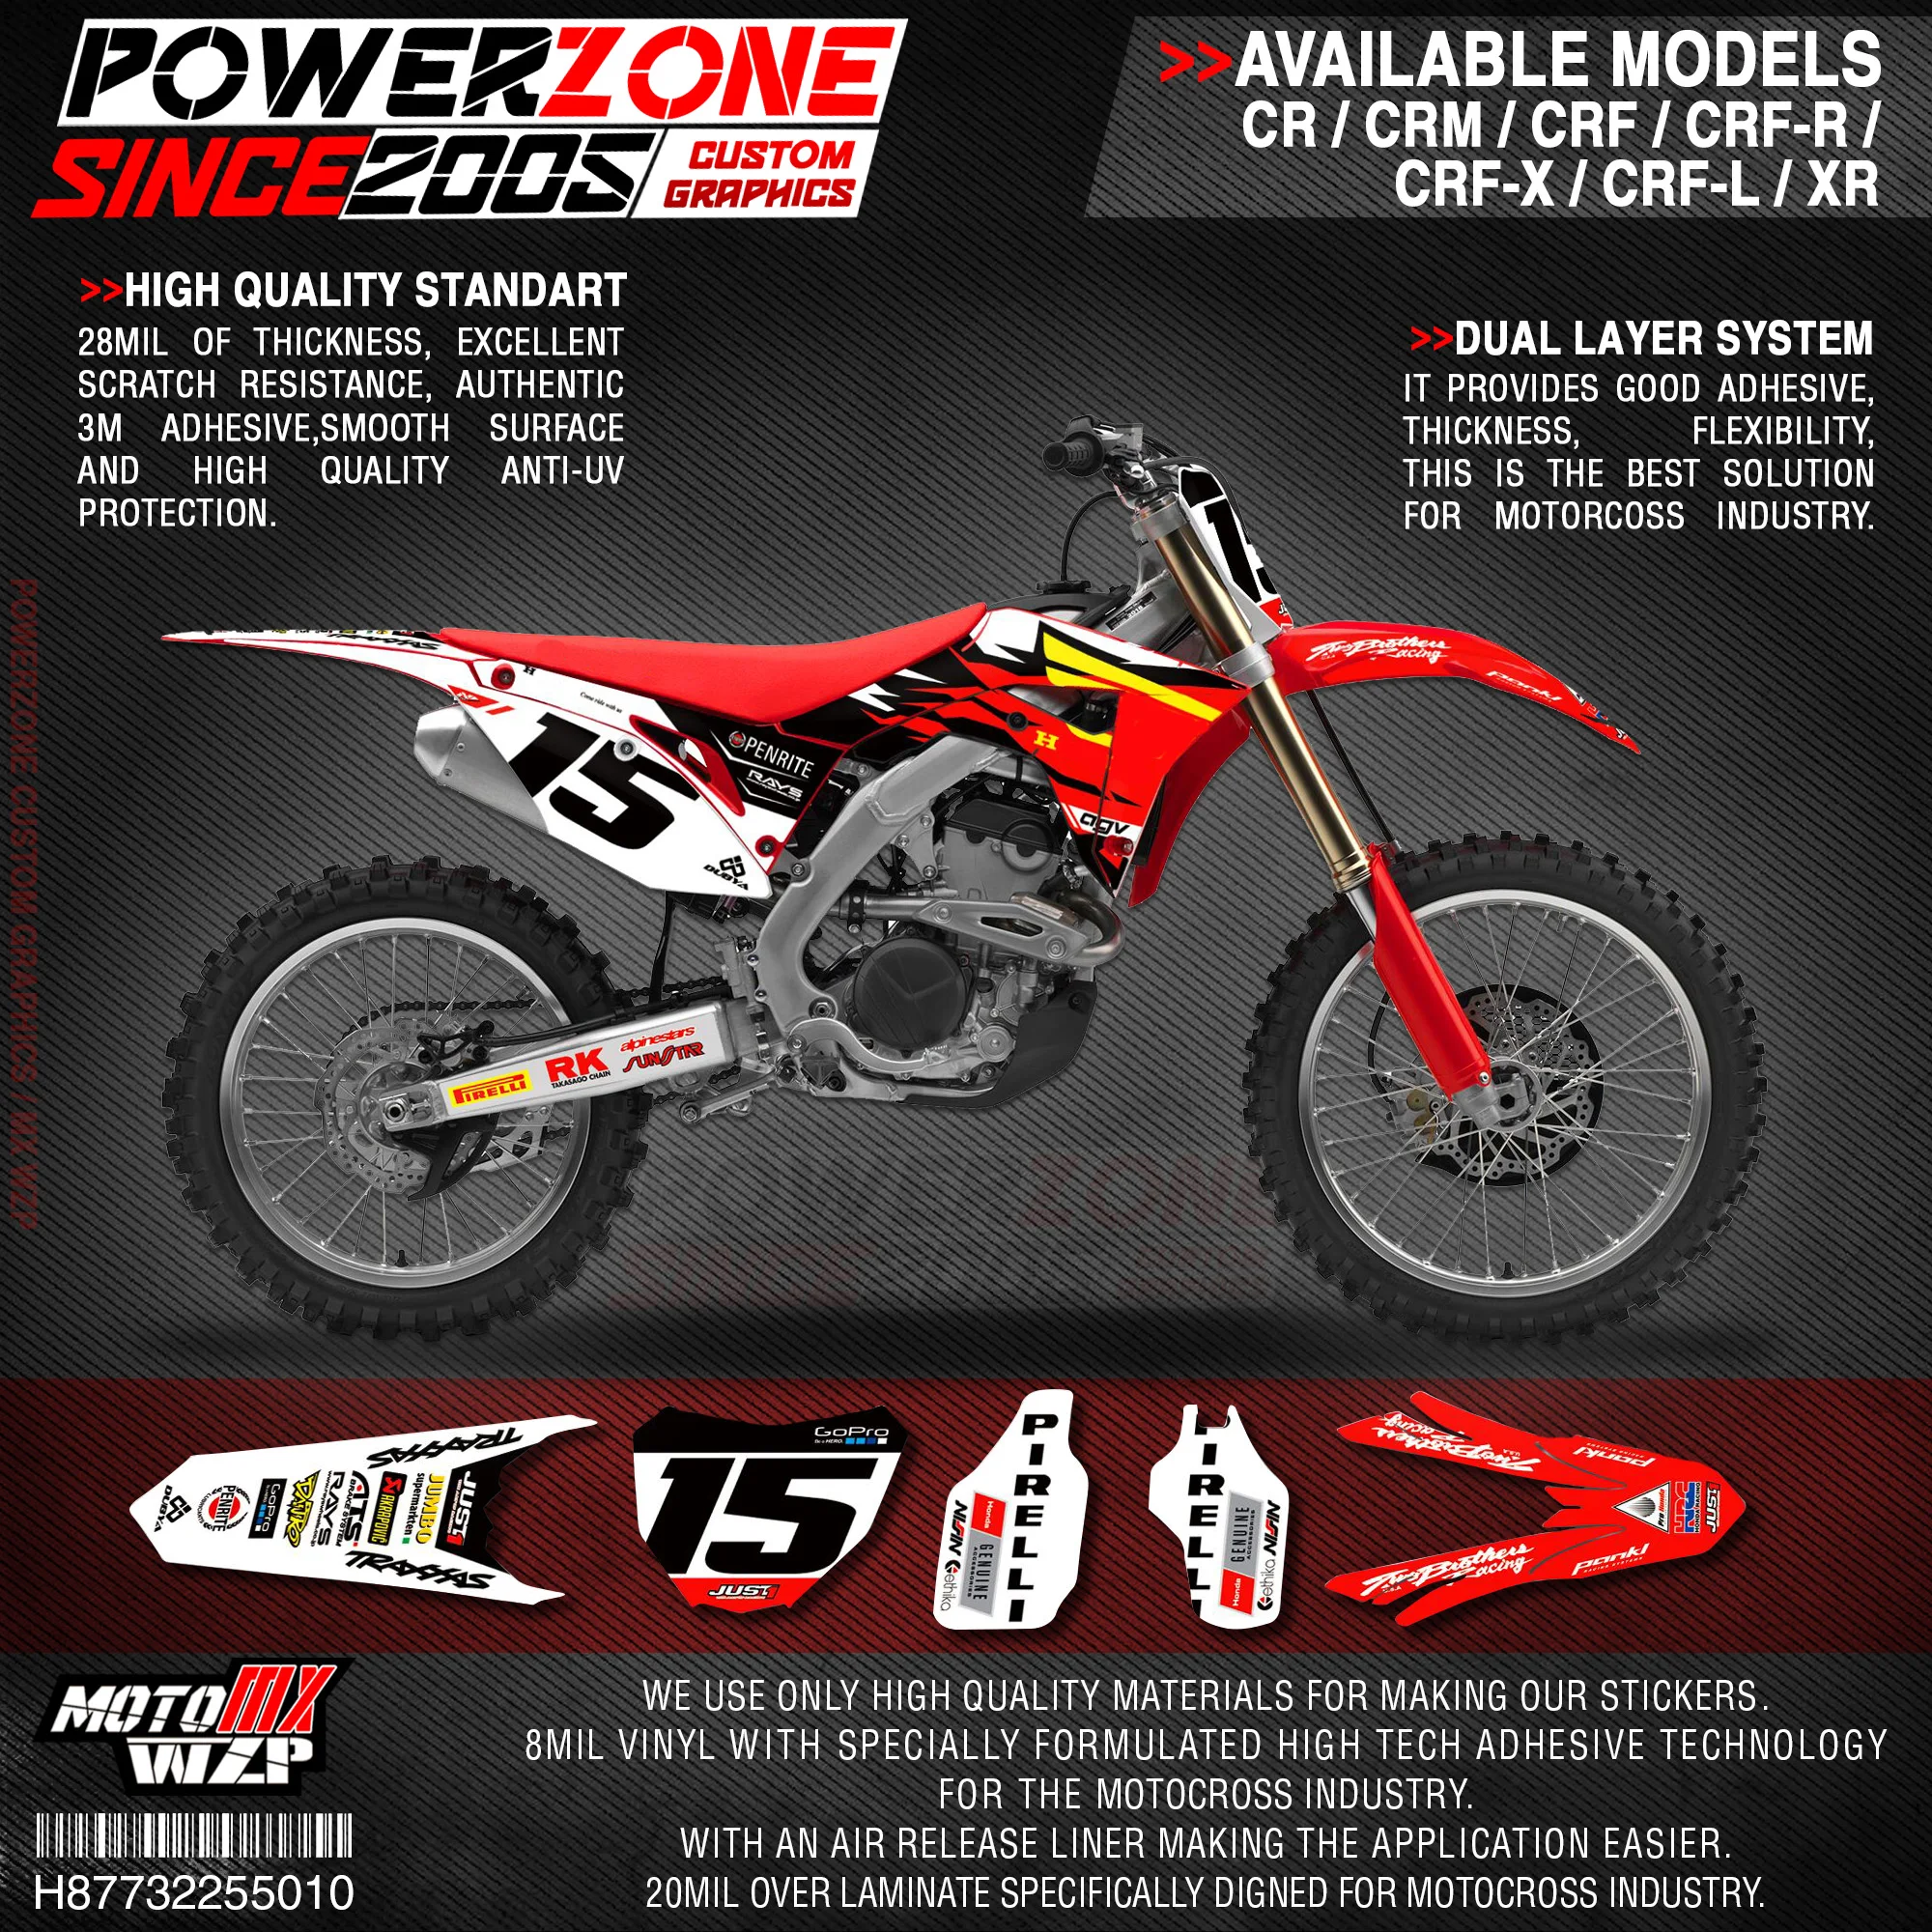 

PowerZone Custom Team Graphics Backgrounds Decals 3M Stickers Kit For HONDA CRF250R 2018-2019 CRF450R 2017-2019 010